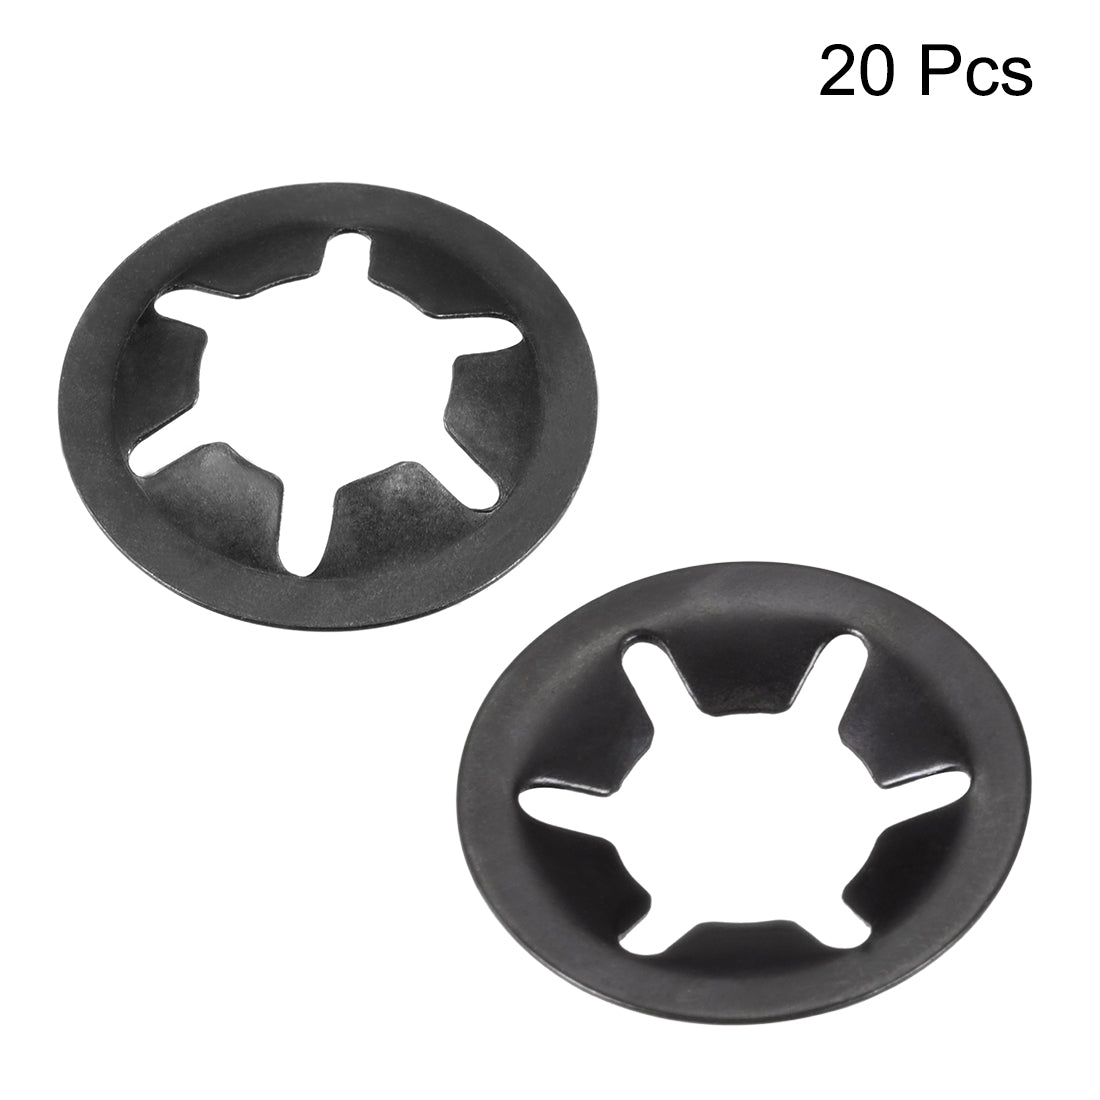 Uxcell Uxcell M10 Internal Tooth Star Locking Washer 9.2mm I.D. 20mm O.D. Lock Washers Push On Locking Speed Clip, 65Mn Black Oxide Finish 20pcs